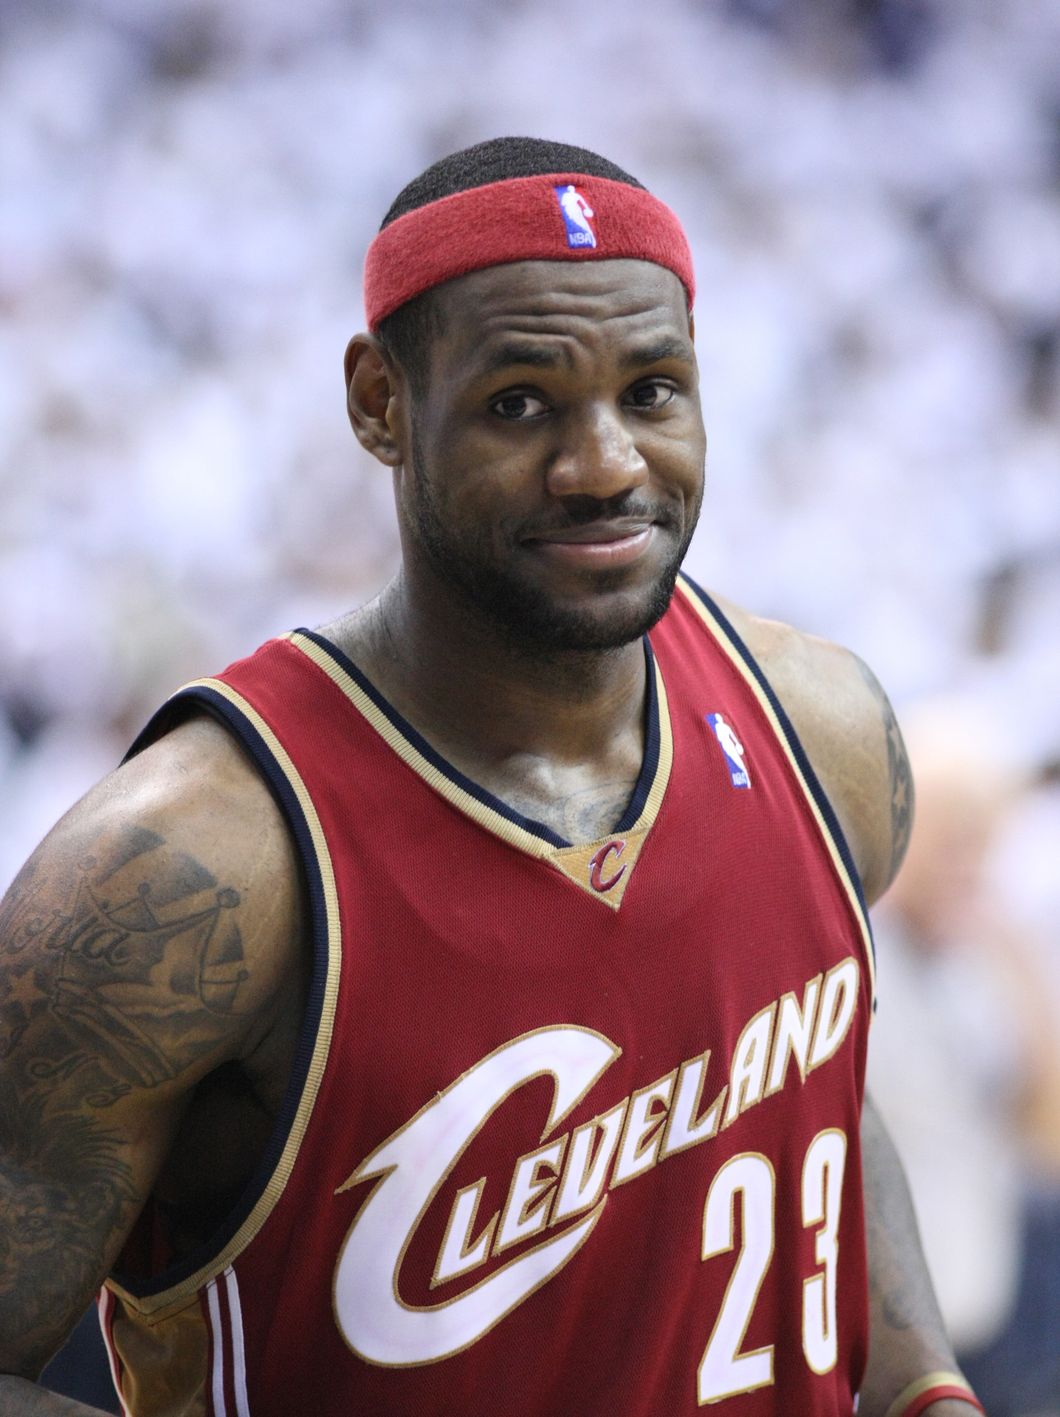 Lebron James’s HBO Special Discusses Race, Sports, and Politics Like Never Before